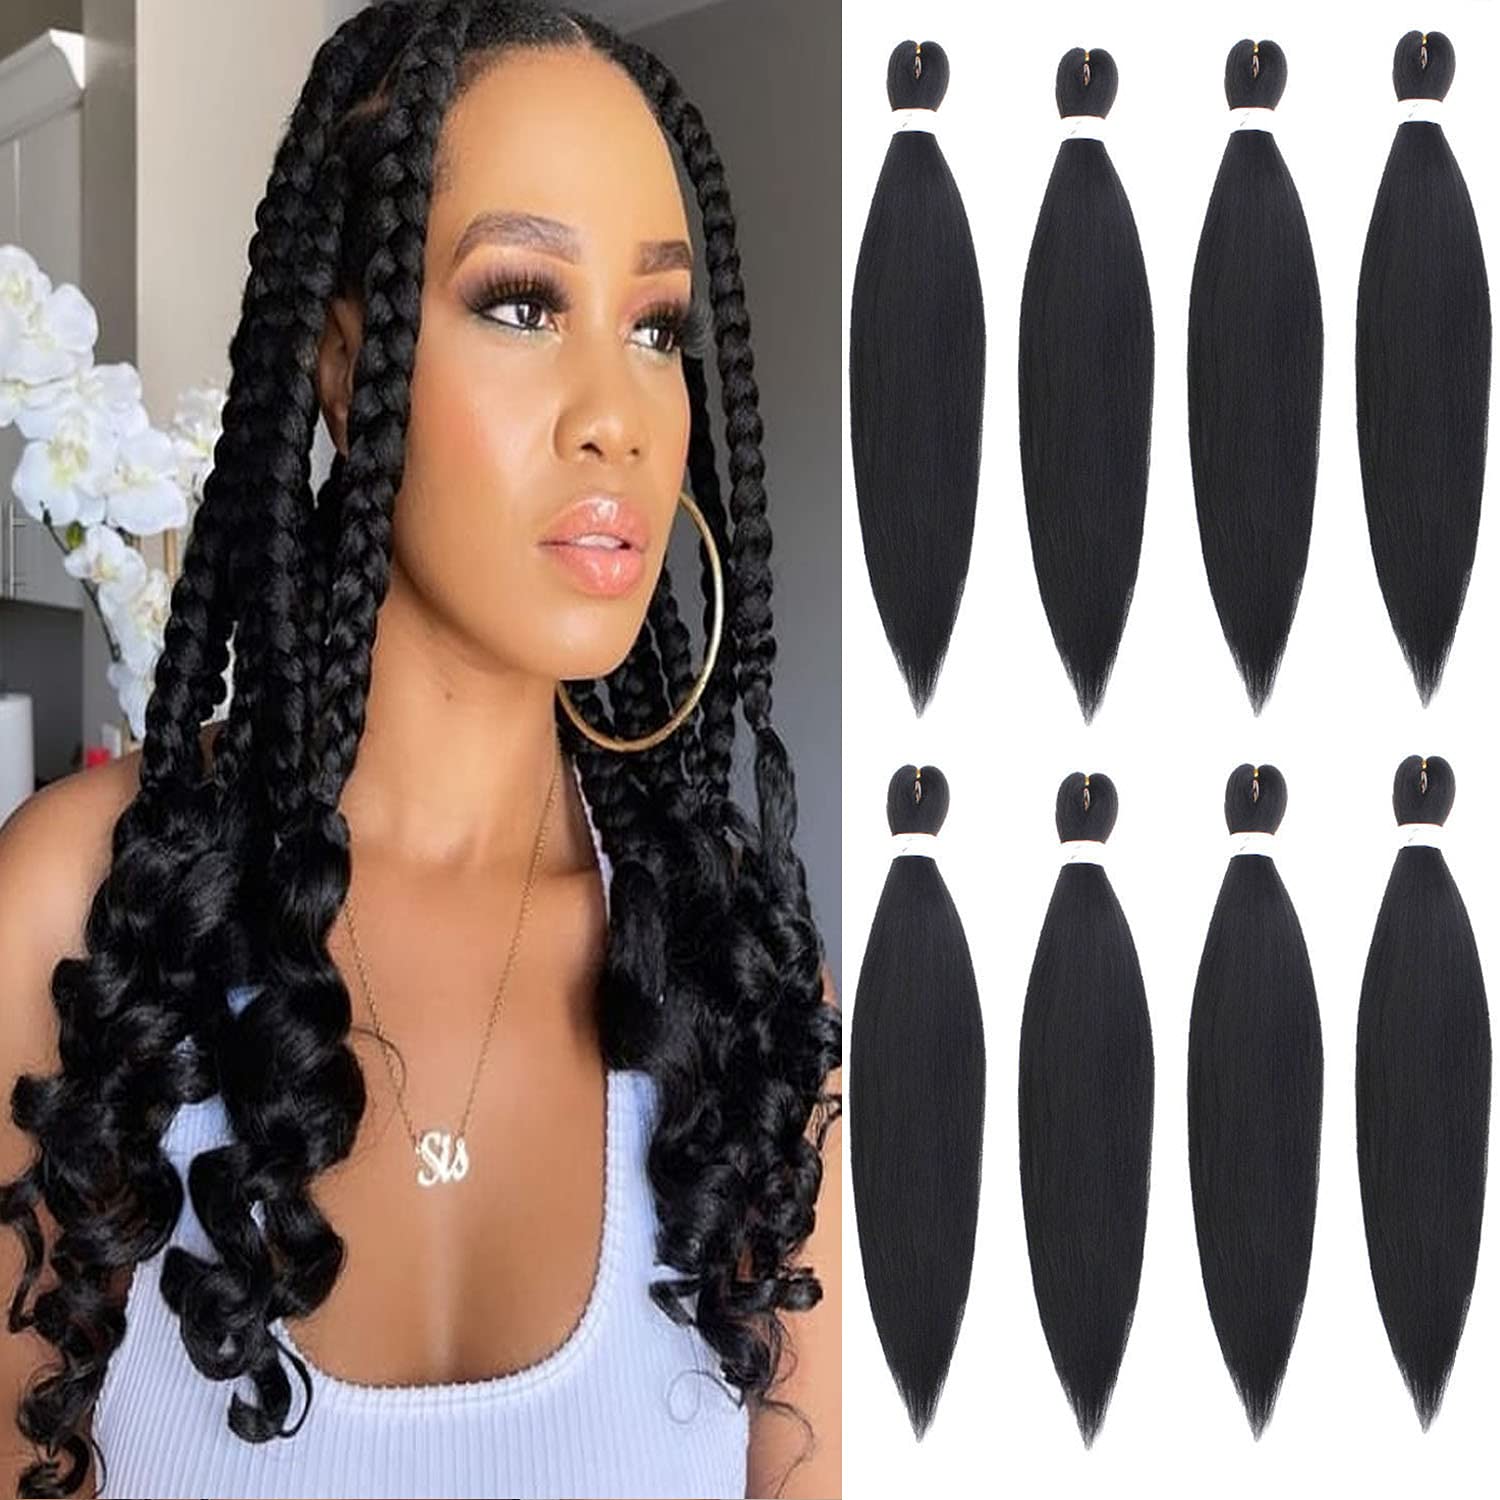 Braiding Hair Pre Stretched Extensions 26 Inch 8 Packs Long Prestretched  Crochet Braids Hair Hot Water Setting(1B/99J)